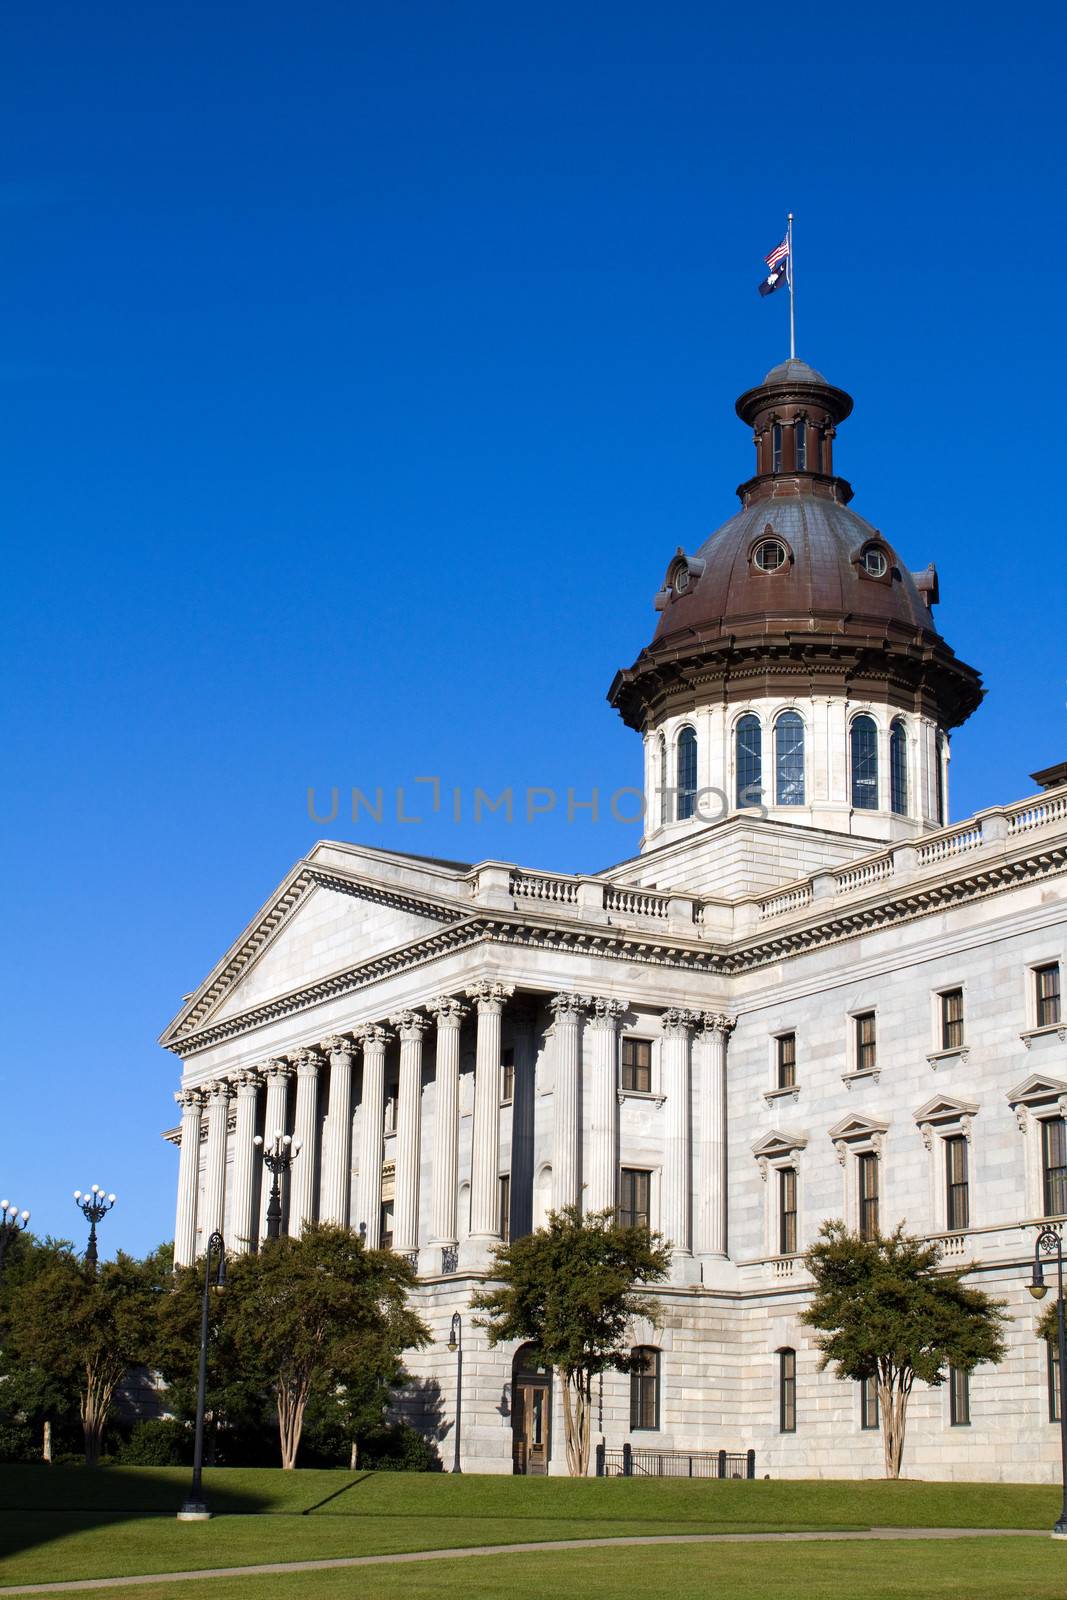 South Carolina capital building located in the city of Columbia, SC.